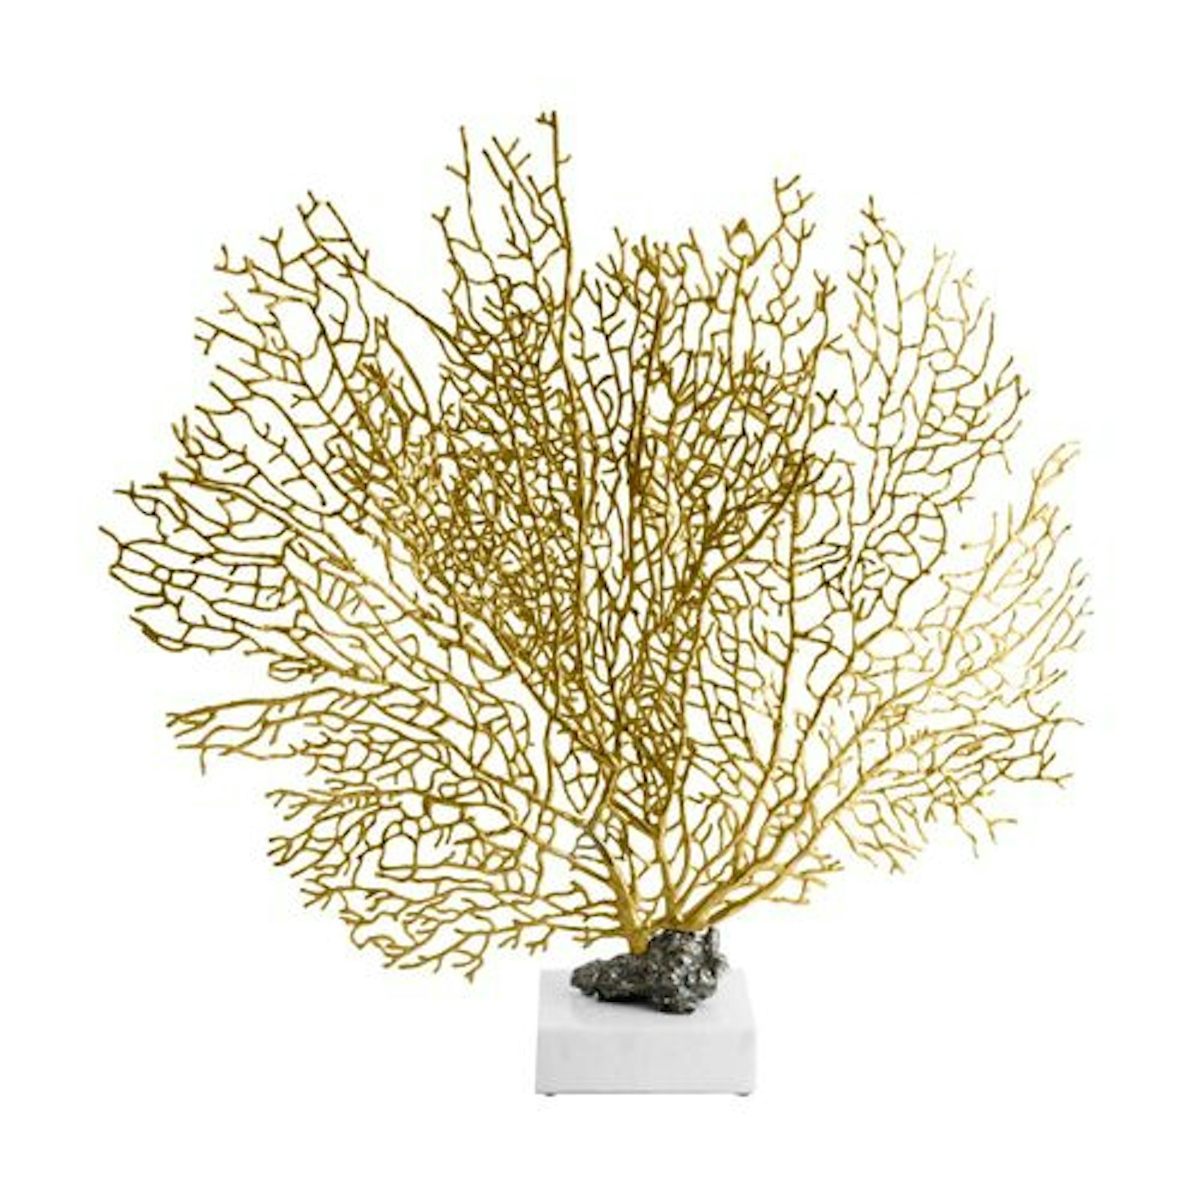 Coral Sculpture in Brass - 6 Best Coral Decor Ideas To Buy For Your Home - LuxDeco.com